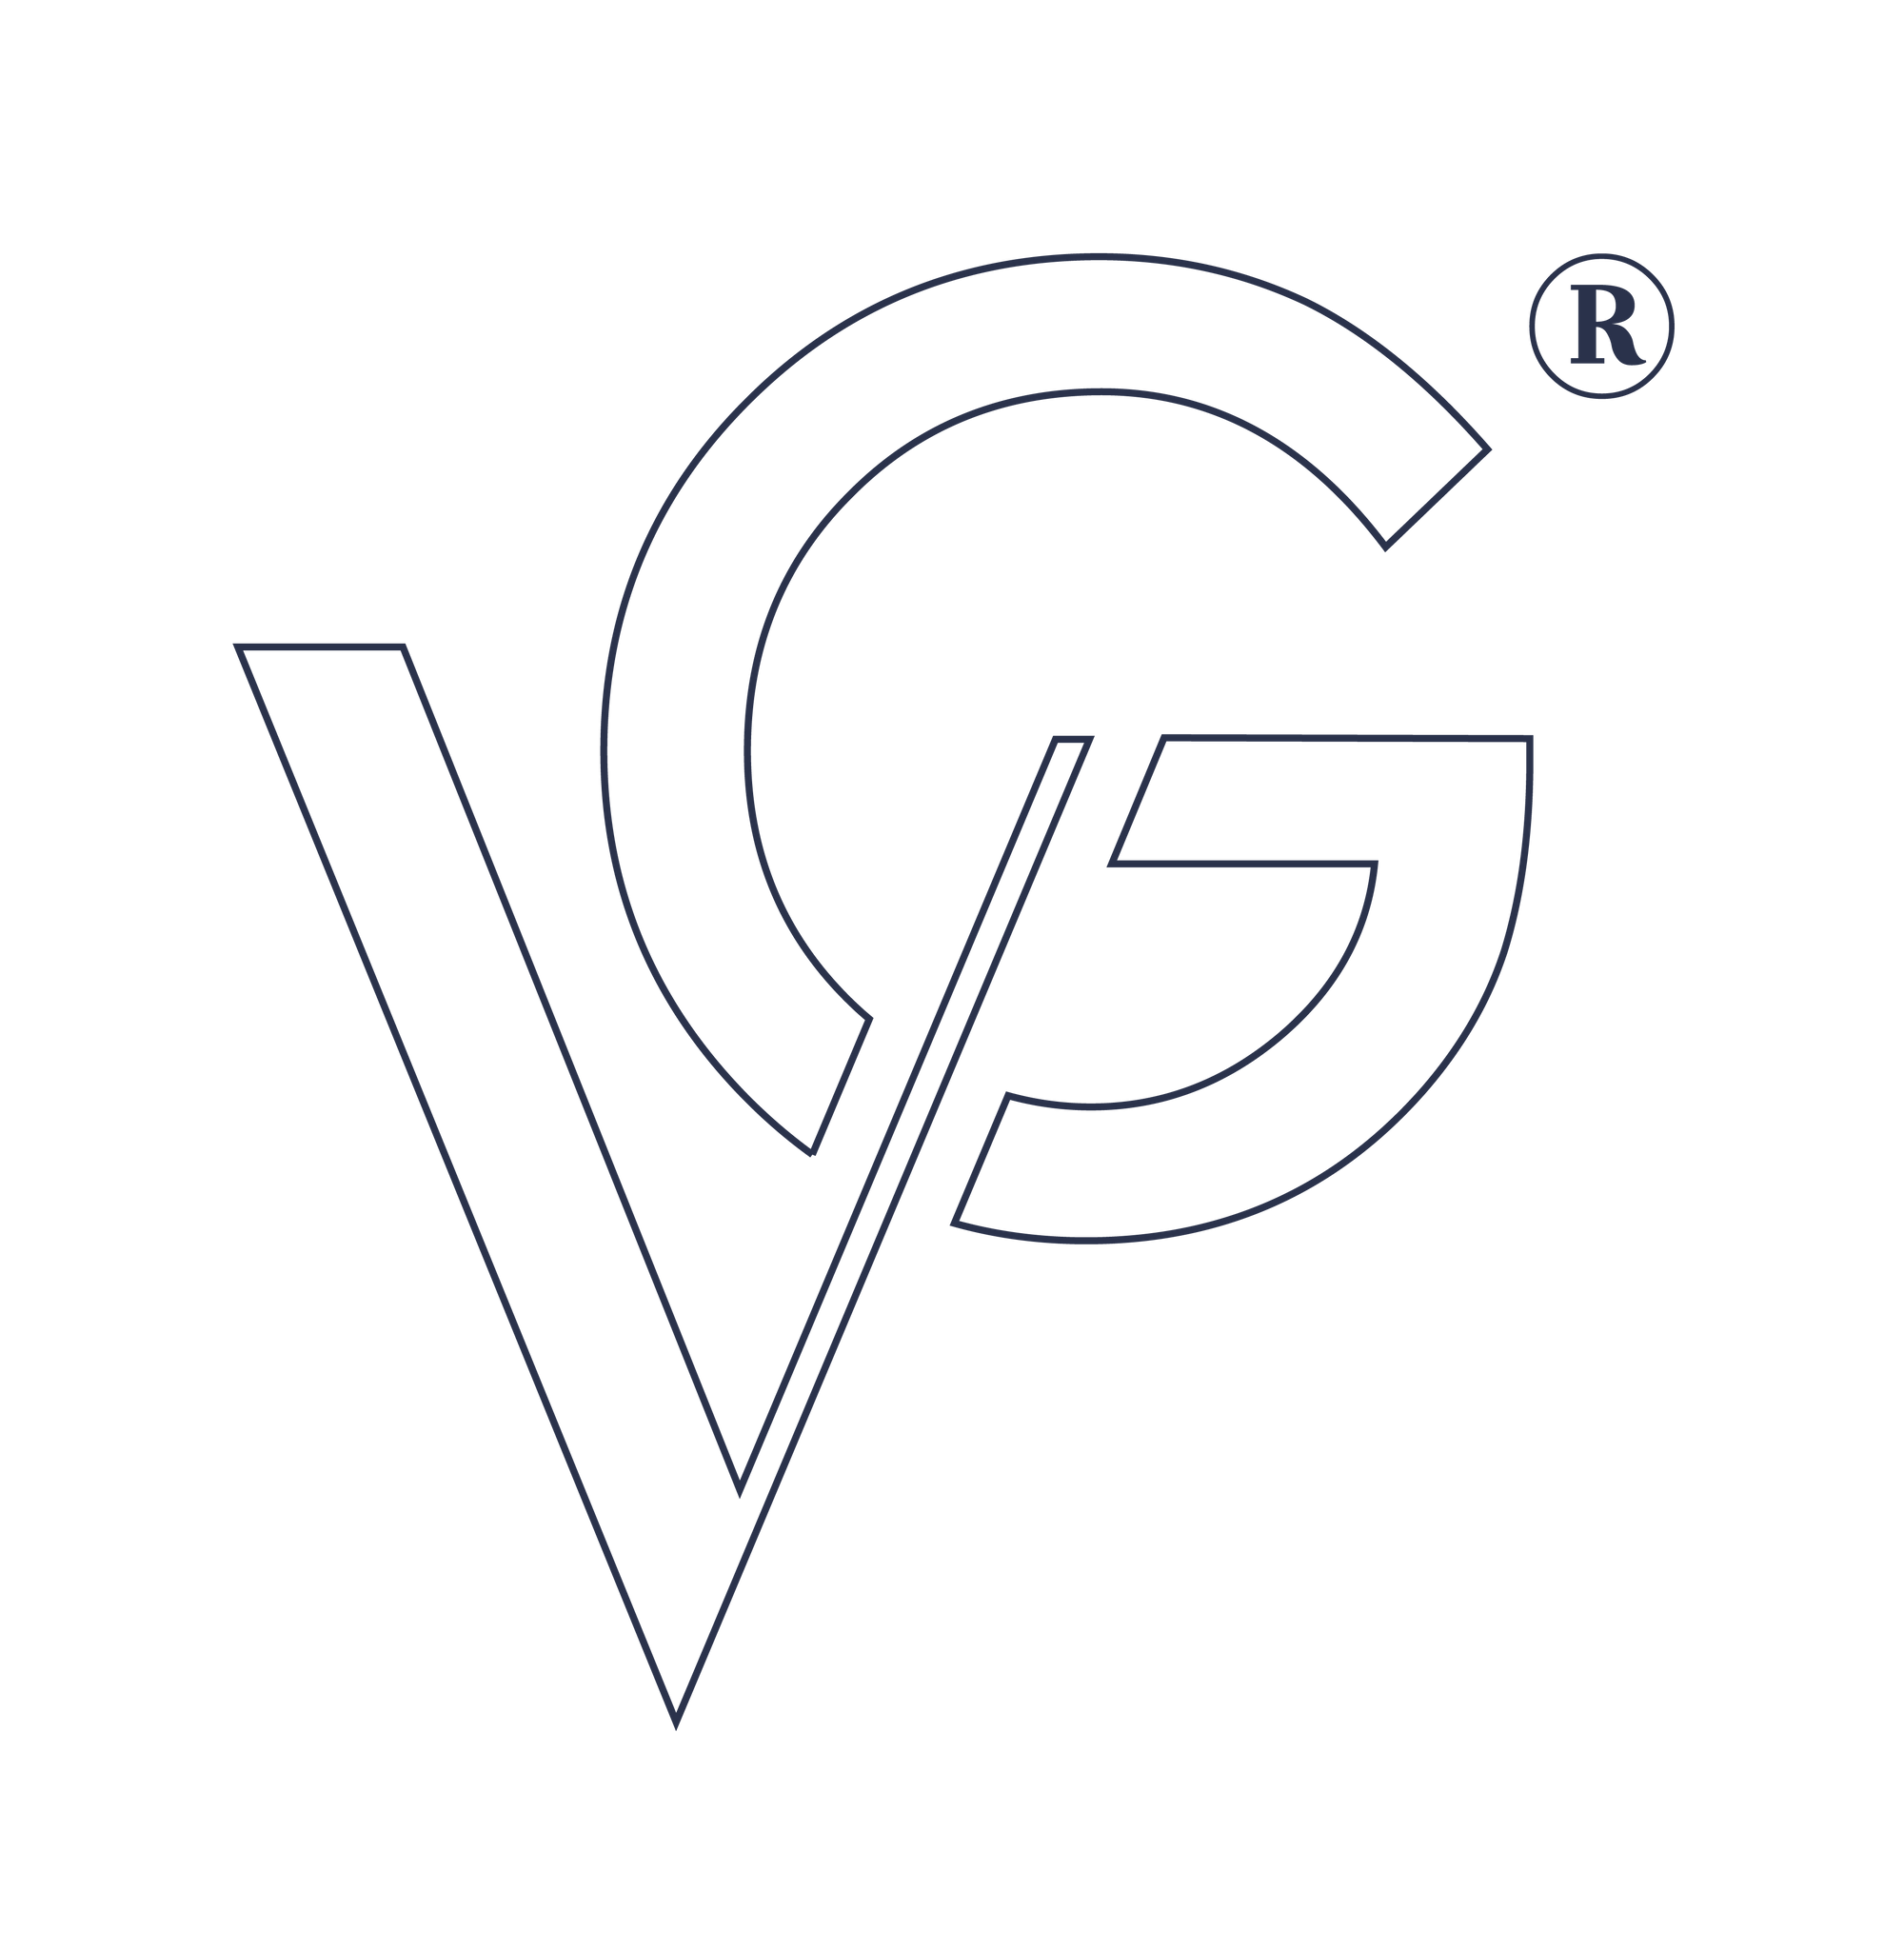 Valgray luxury accessories brand logo. Image is a V and a G linked together to depict the Valgray name brand.